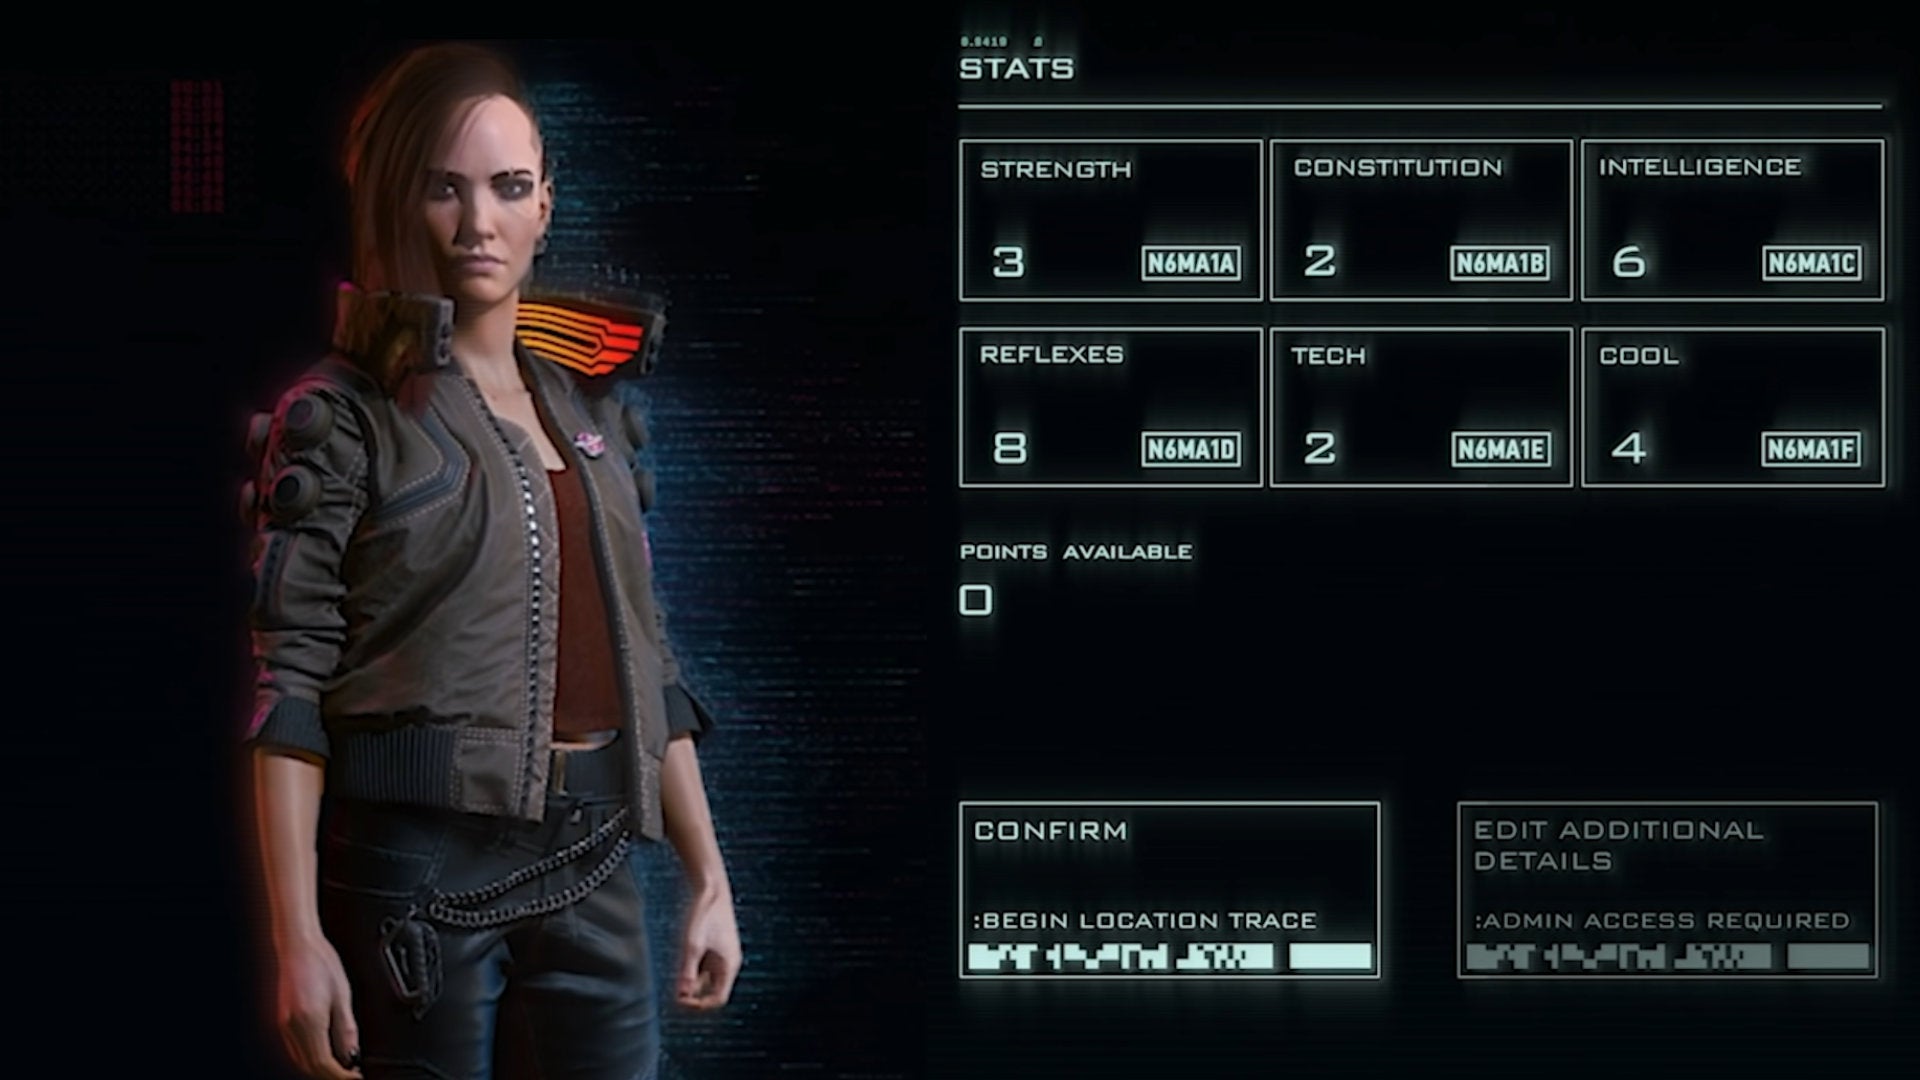 Image for Cyberpunk 2077 character creation: all customisation options and attributes revealed